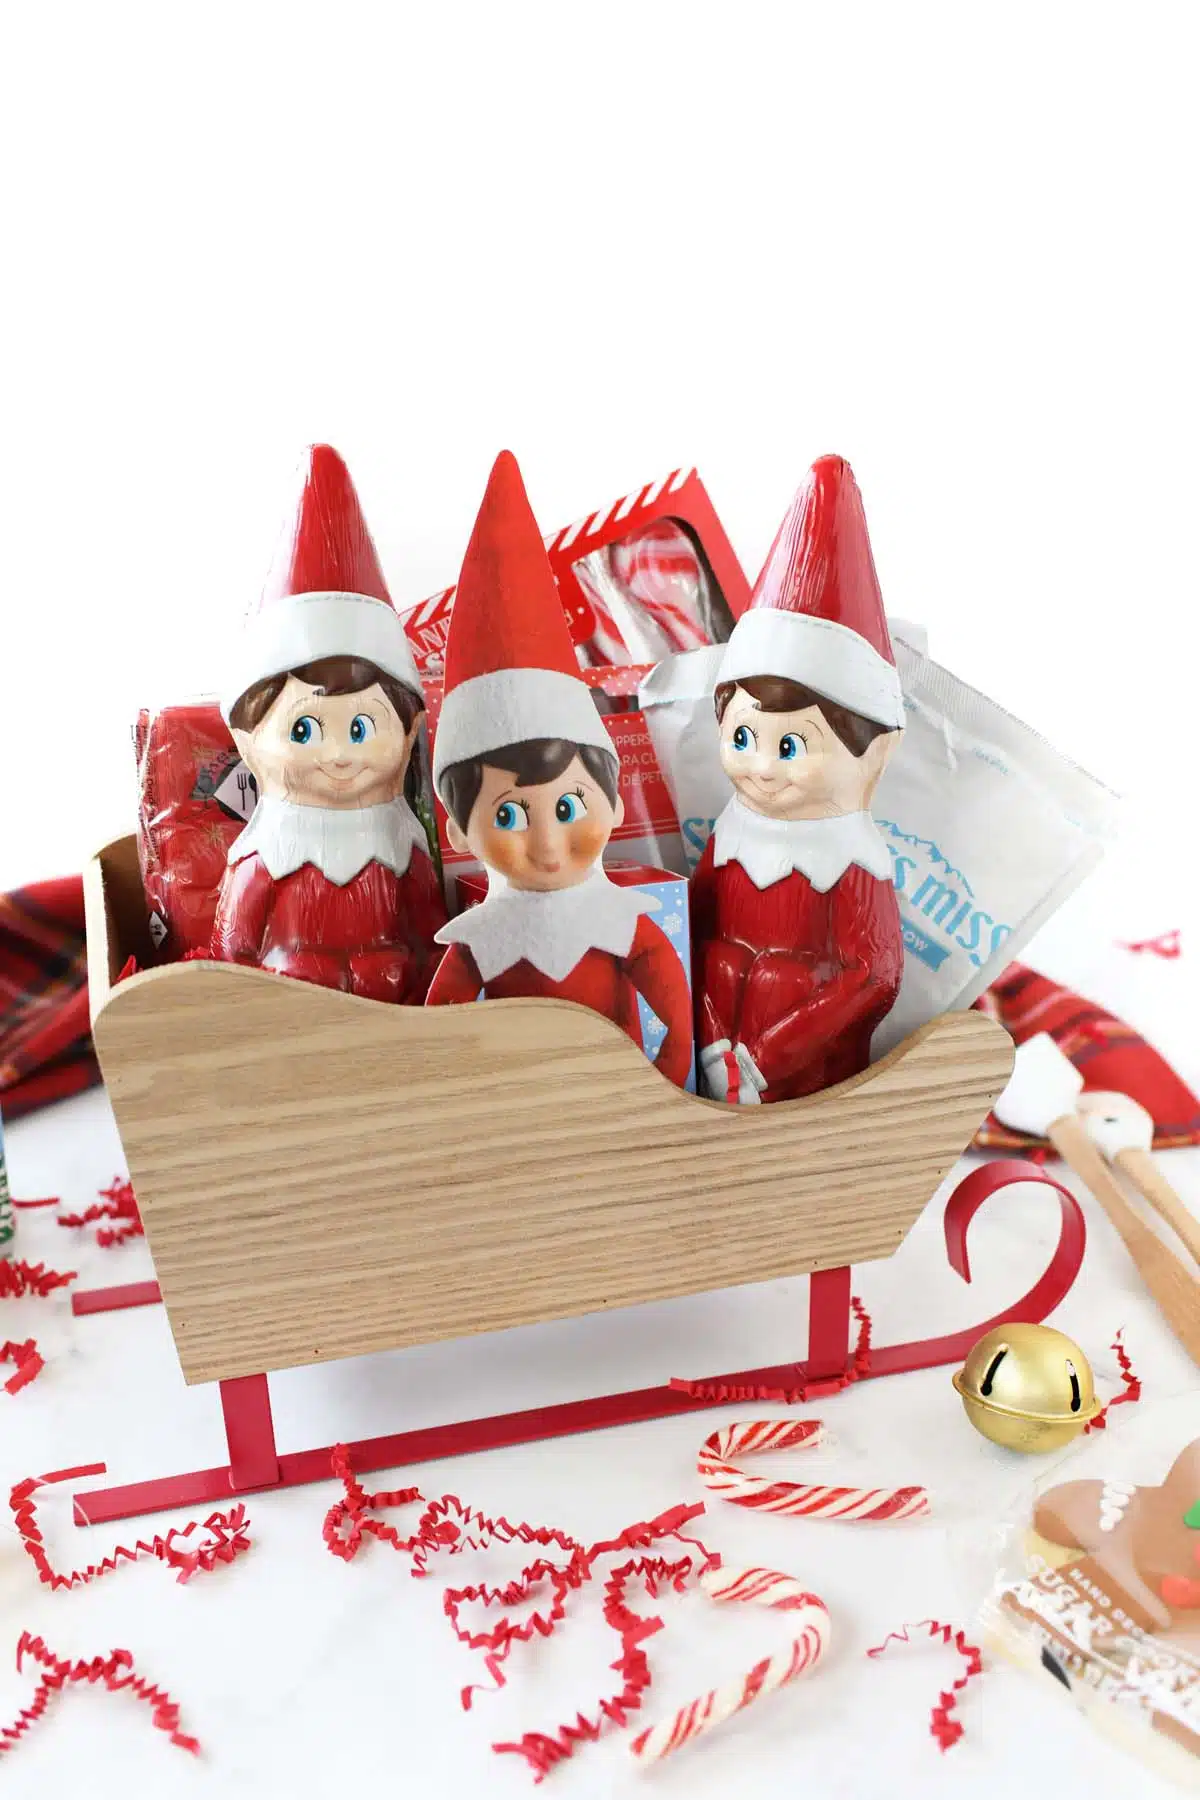 Elf on the shelf candy in a red wooden sleigh gift idea.